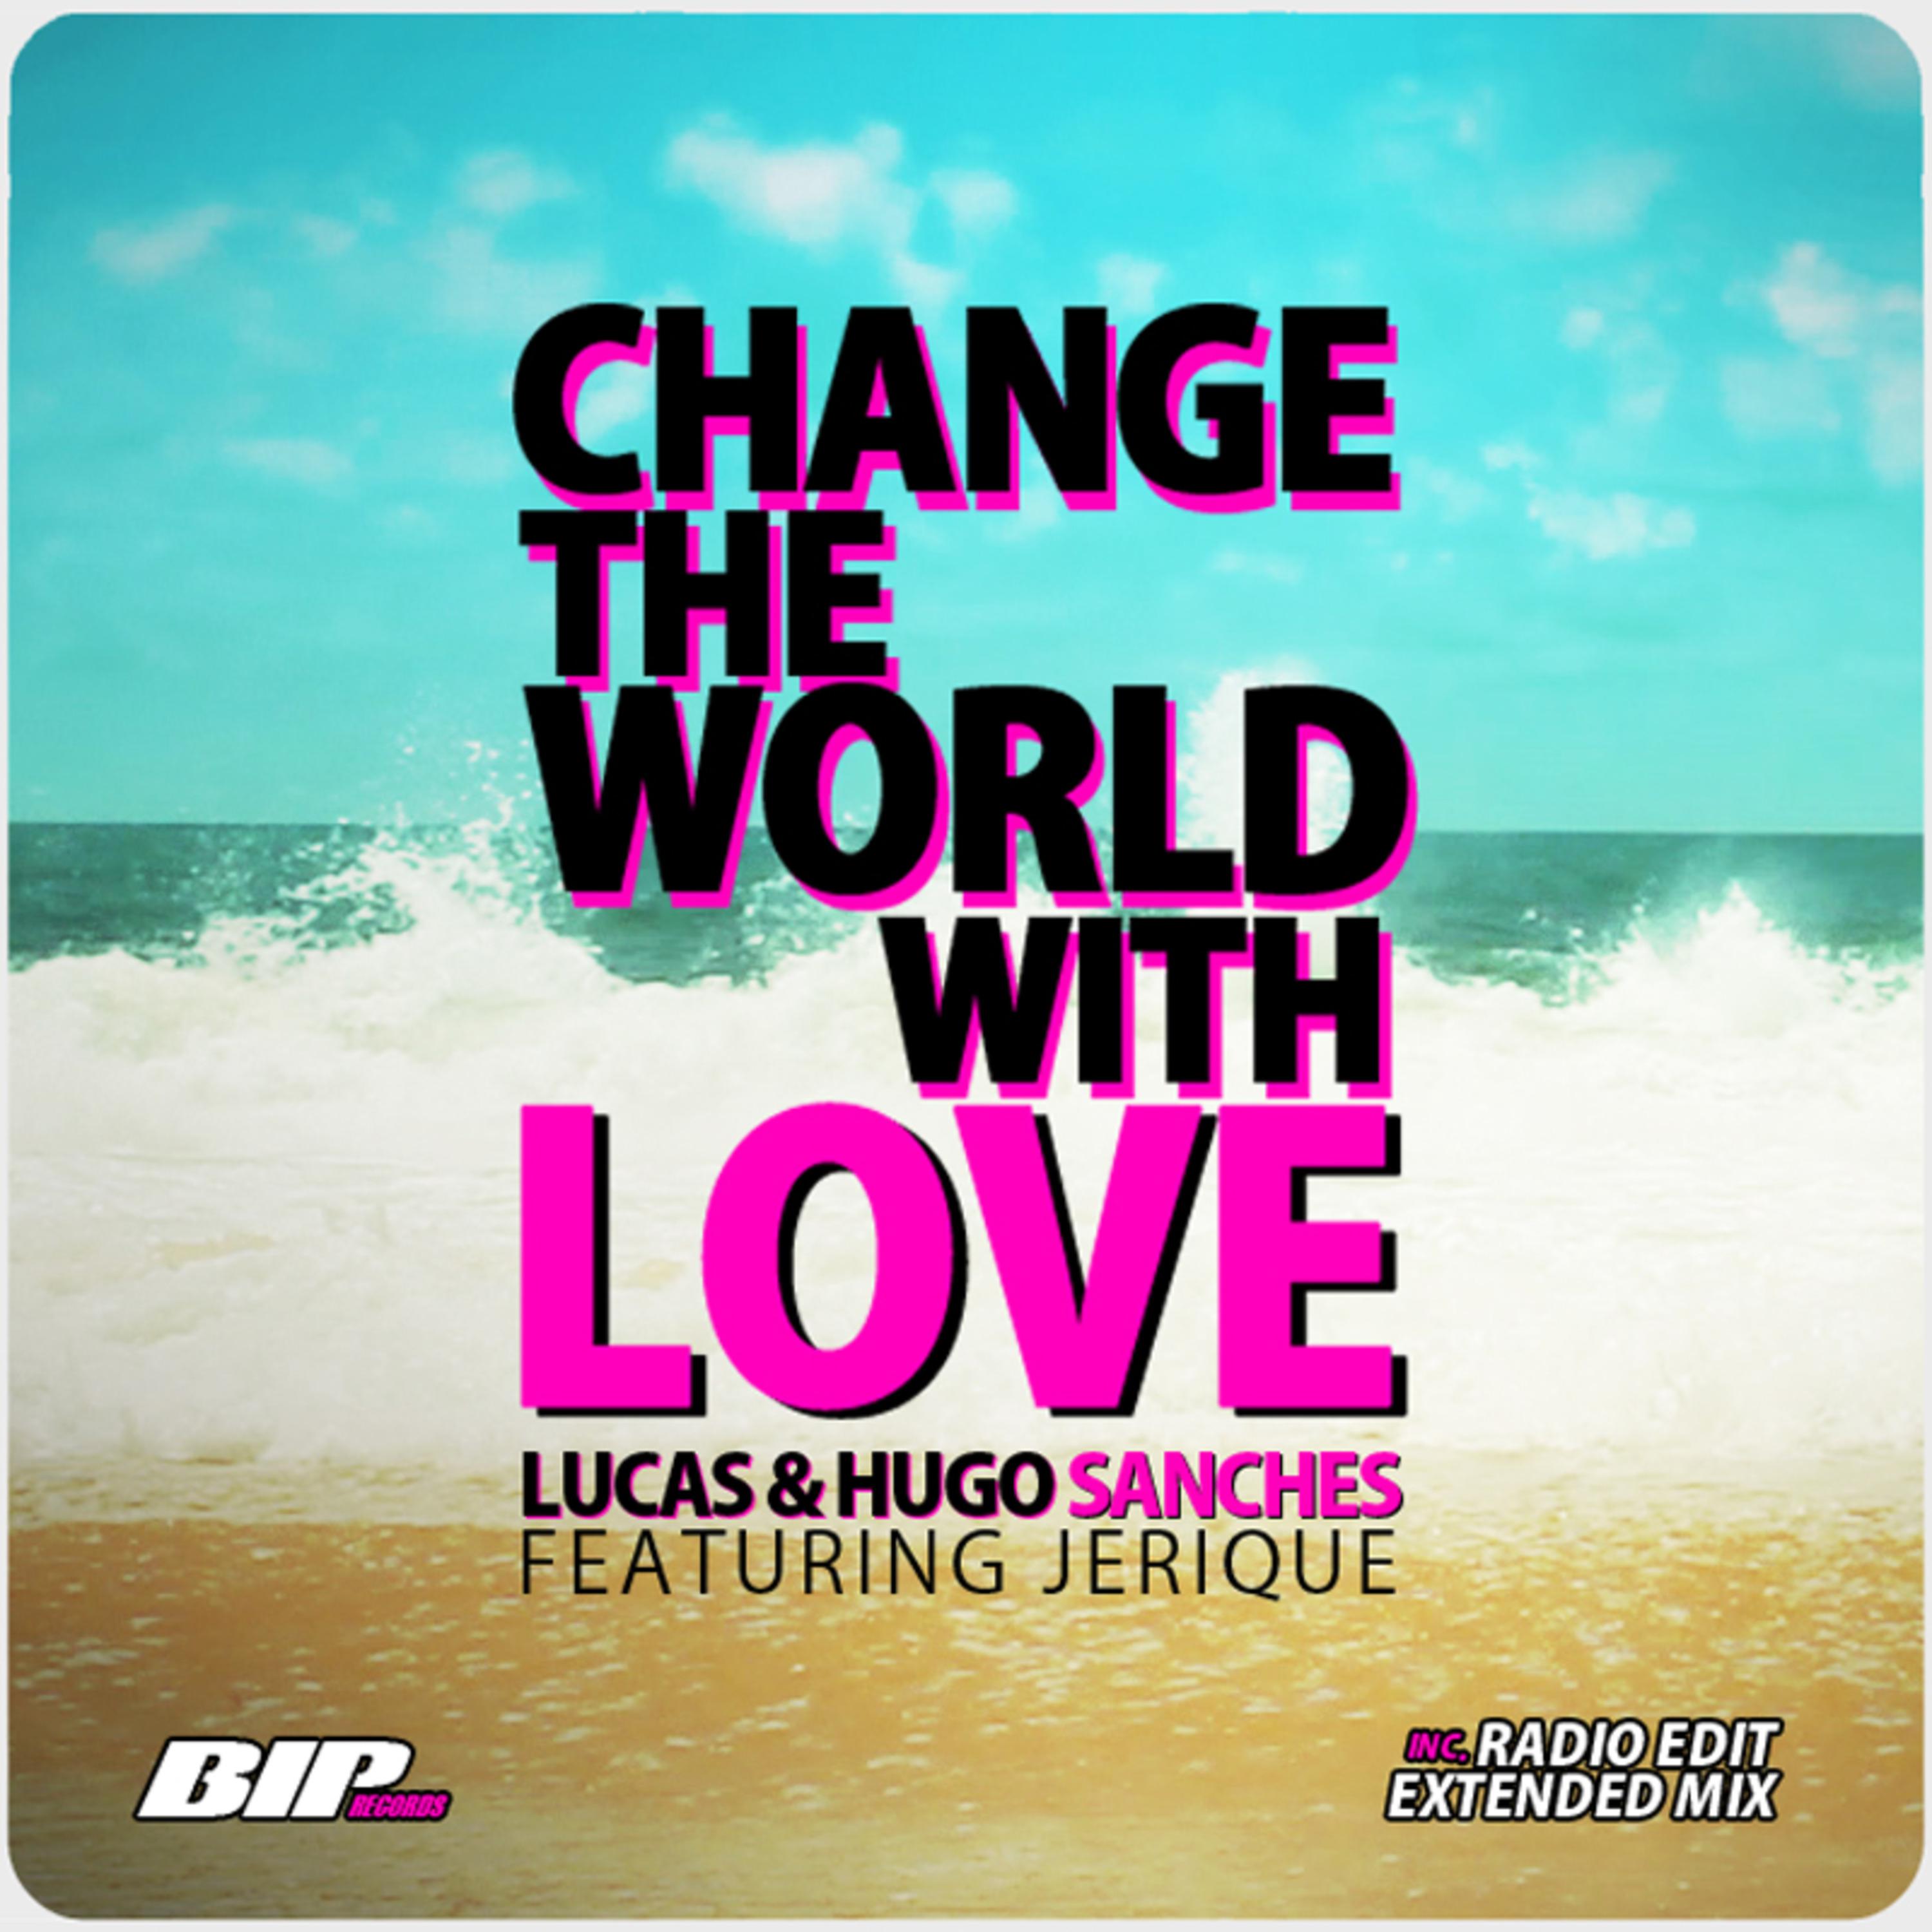 Hugo Sanches - Change the World With Love (Extended Mix)